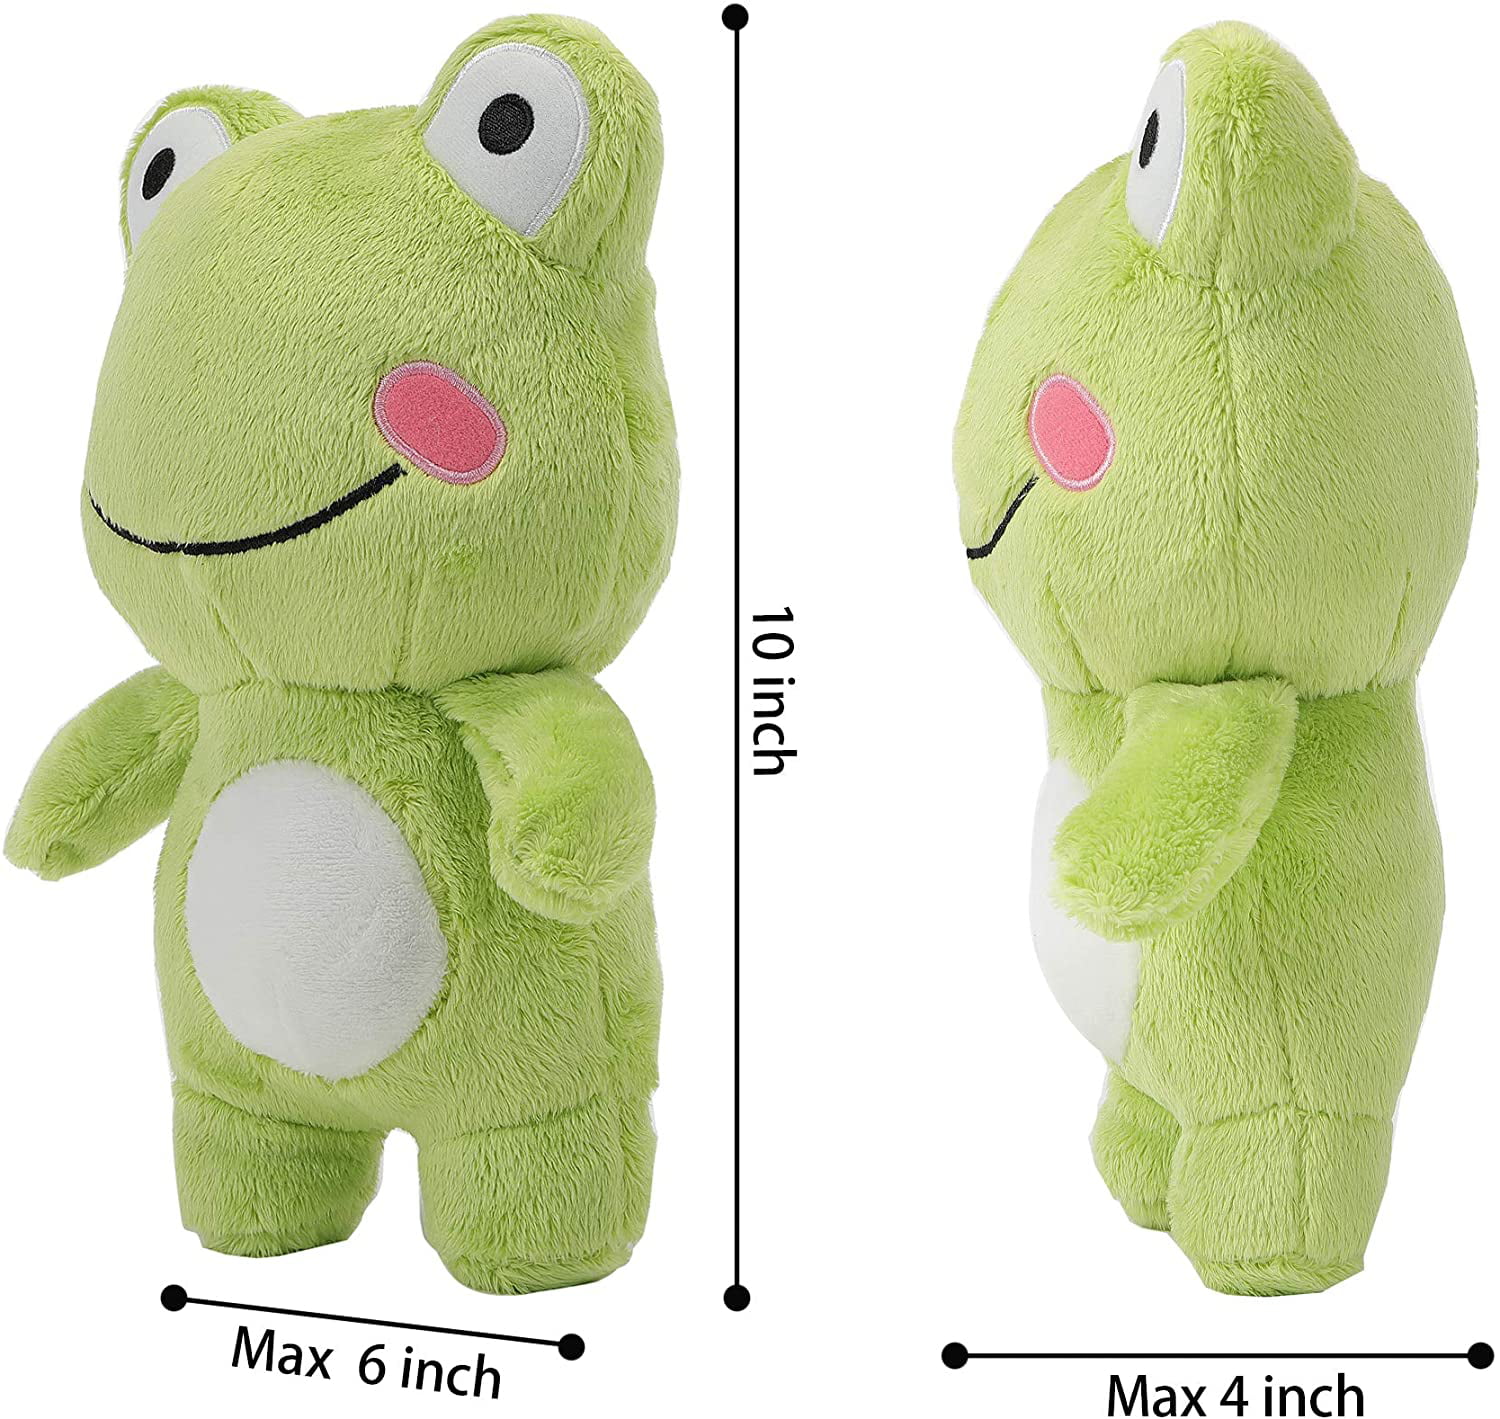 3D Super Soft Cute Frog Stuffed Animal Plush Dolls With Shy Cheeks Kids Creative Decoration Cuddly Birthday Gift Gifts For Children Friends Boys And Girls. Holiday Animal Decorations 